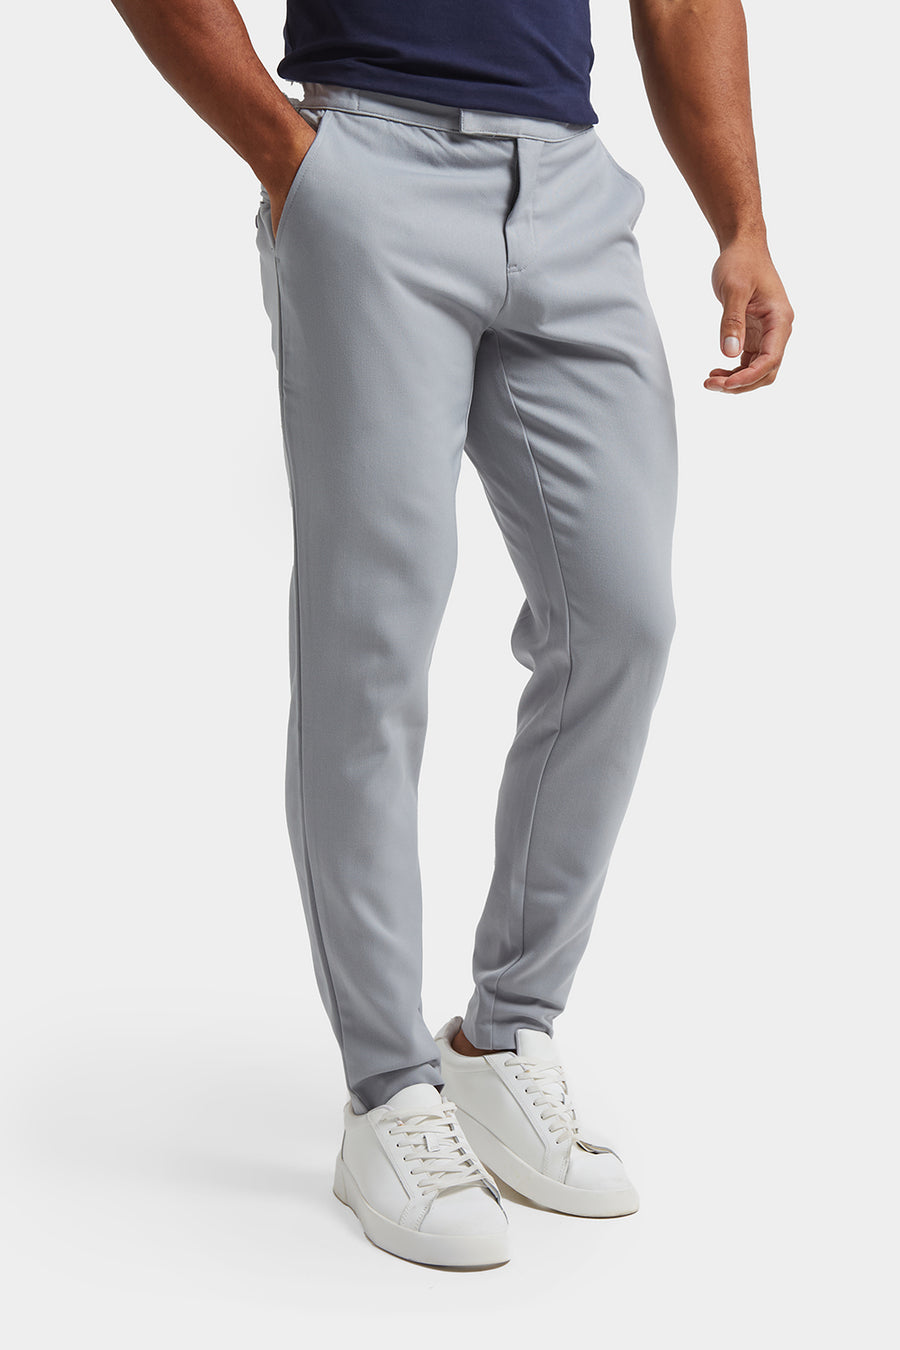 365 Pants 2-Pack - TAILORED ATHLETE - USA